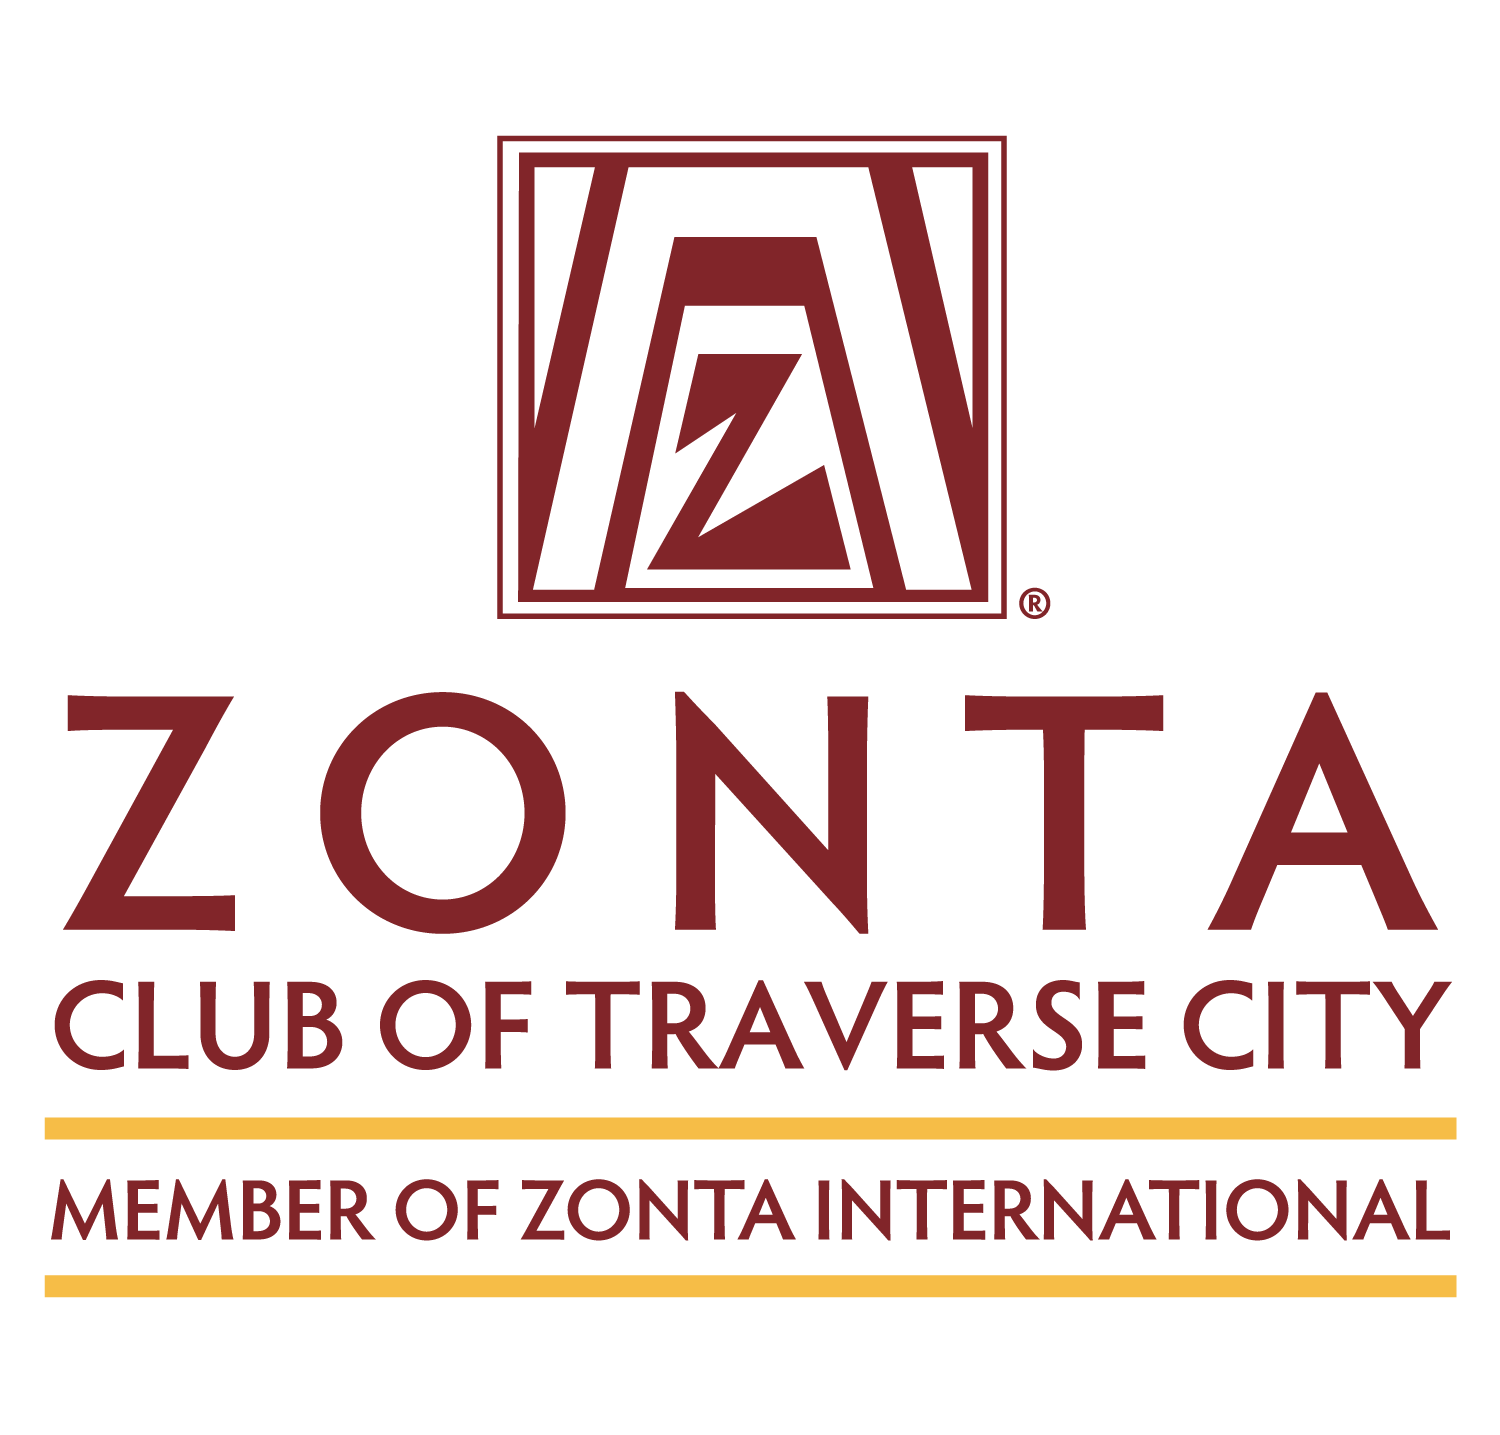 Zonta Club of Traverse City | Empowering Women Worldwide through Service and Advocacy